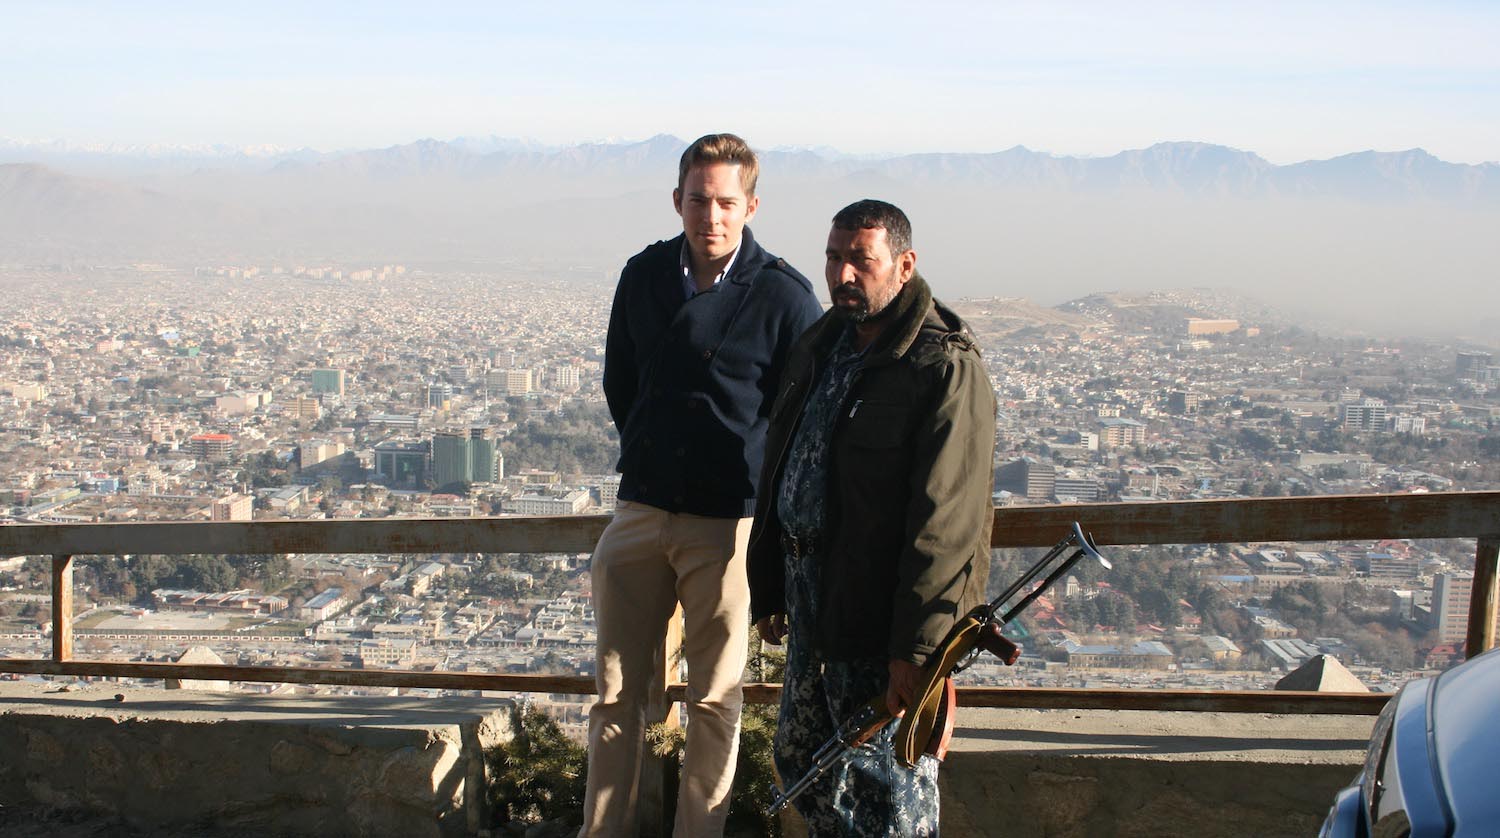 two men standing on a ledge with a city in the background